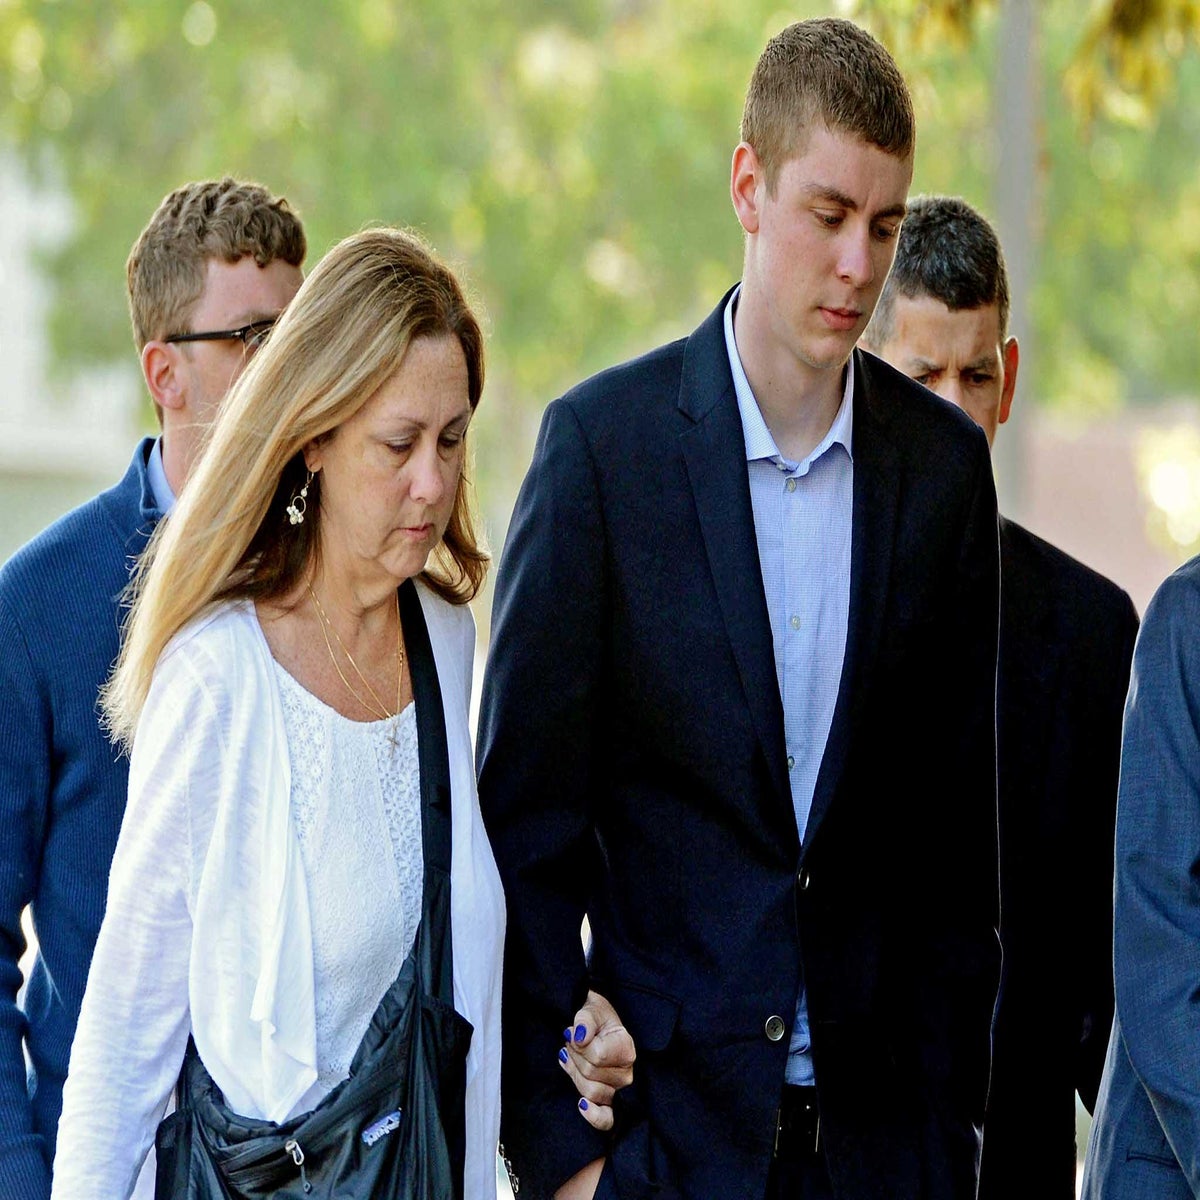 Stanford rape case: To the swimmer who attacked a girl, I'm sorry. We have  failed you with such a light sentence | The Independent | The Independent